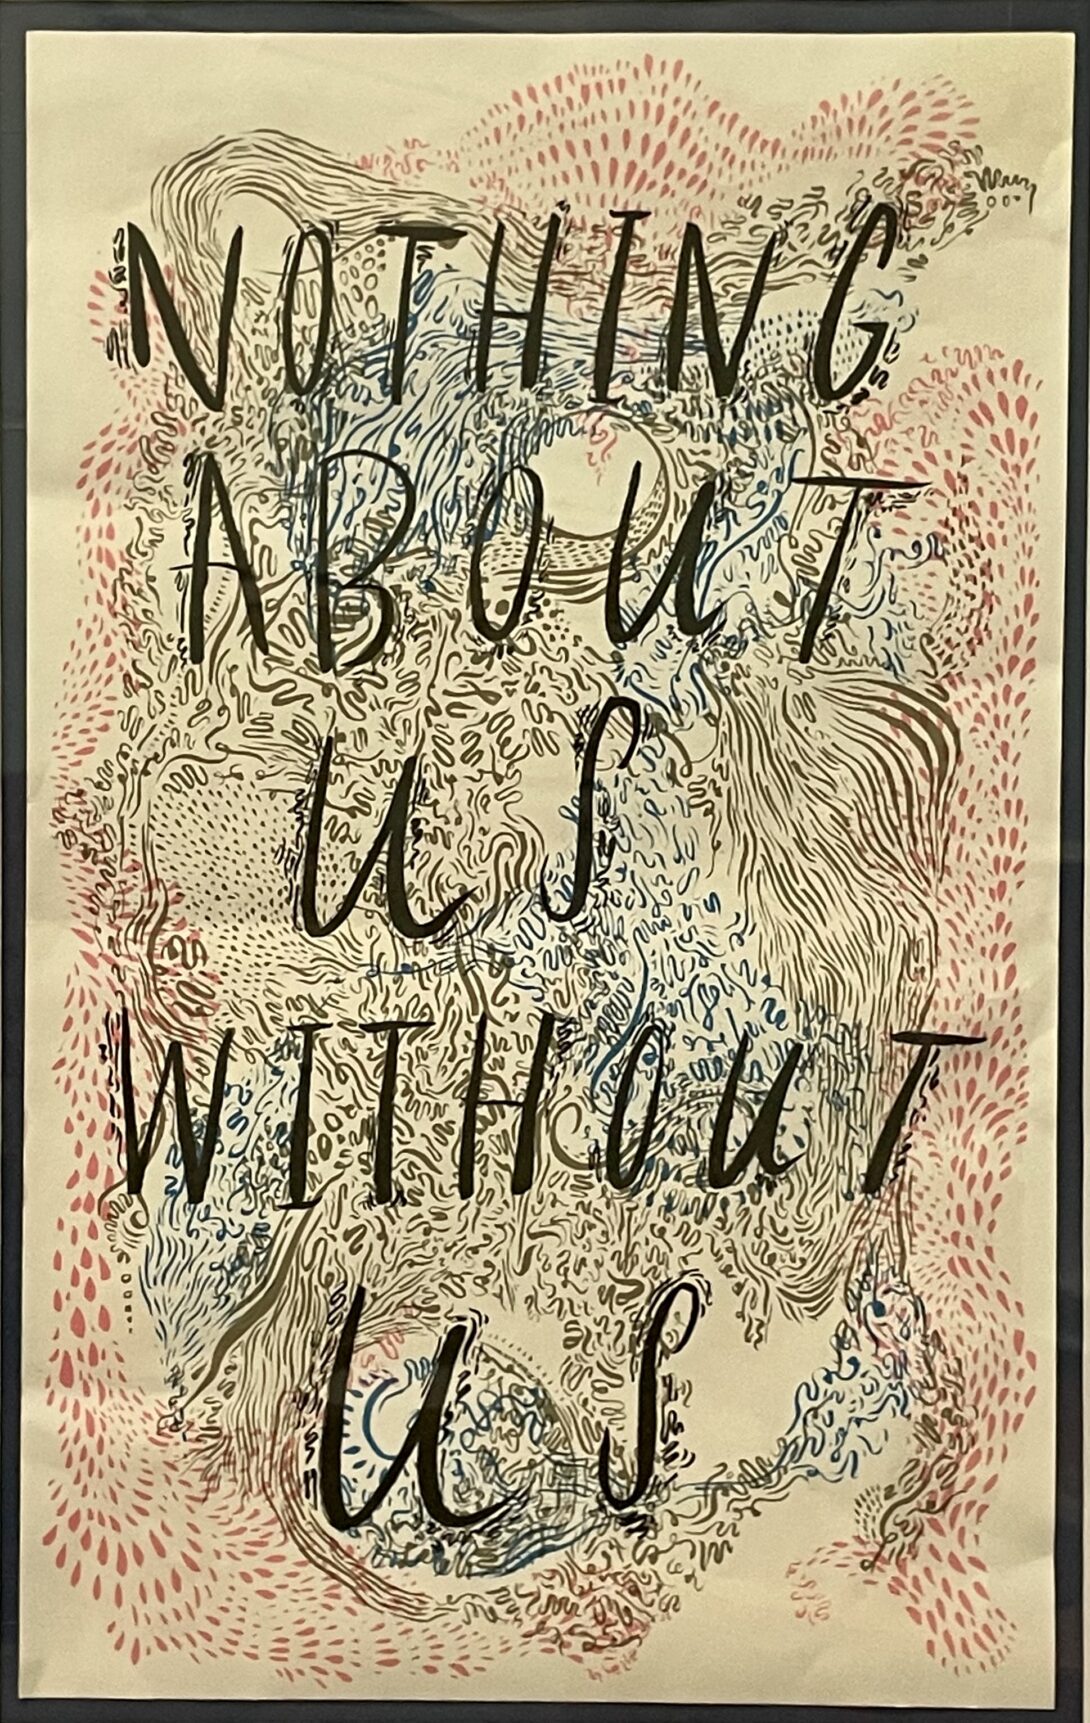 A black rectangular frame with a thick white border around the artwork in the center. The artwork has a white background with a swirl of pink, dark gray, and blue of differing patterns. The pink pattern is petals and the dark gray and blue are wavy lines. On top of this is the text which reads “Nothing About us Without us”